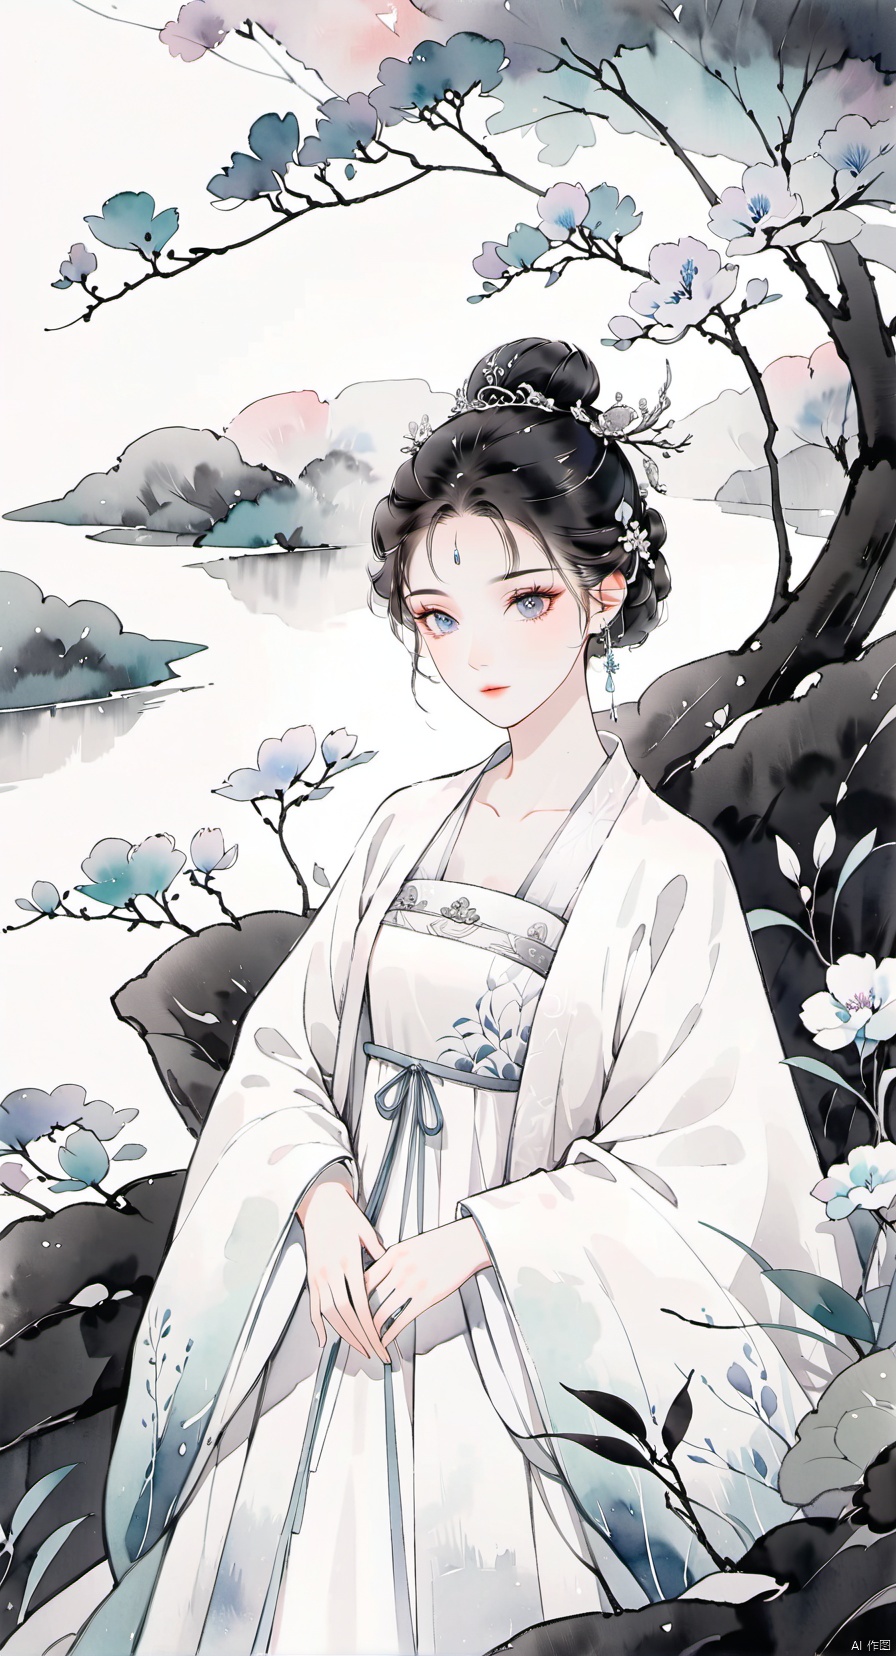 /imagine prompt: A gentle figure clad in
white Hanfu, her hair styled in a traditional
updo adorned with silver jewelry,
surrounded by soft-hued ink paintings
depicting nature. Created Using:
watercolor texture, pastel shades, delicate
facial features, high resolution, traditional
Chinese art style --ar 1:1--v 6.0